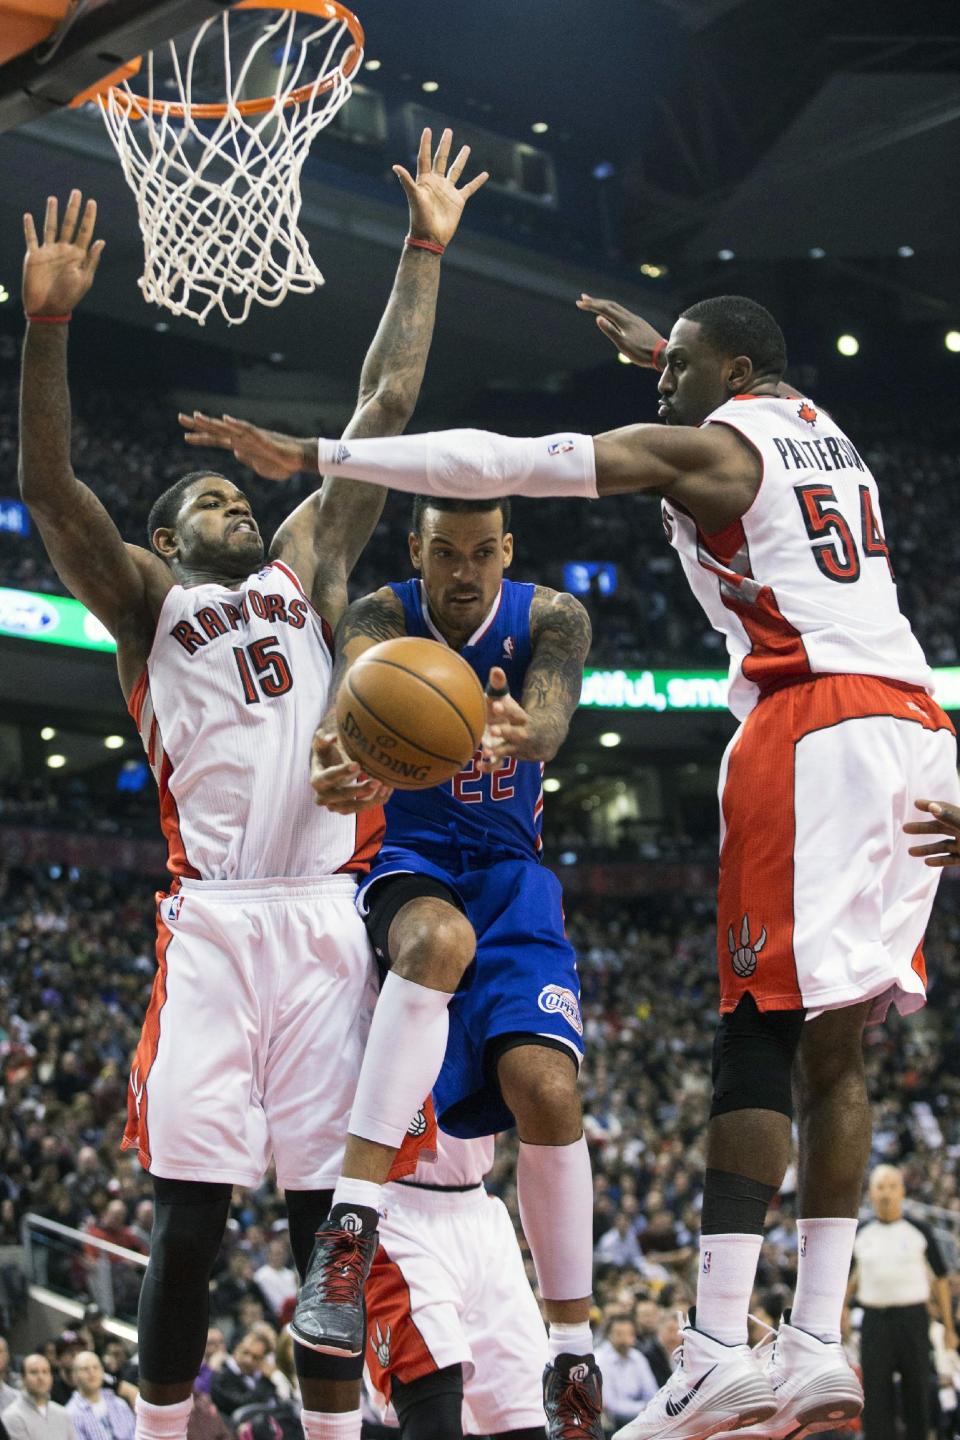 Los Angeles Clippers' Matt Barns, center, looks to pass between Toronto Raptors' Amir Johnston, left, and Patrick Patterson during the first half of an NBA basketball game, Saturday, Jan. 25, 2014 in Toronto. (AP Photo/The Canadian Press, Chris Young)